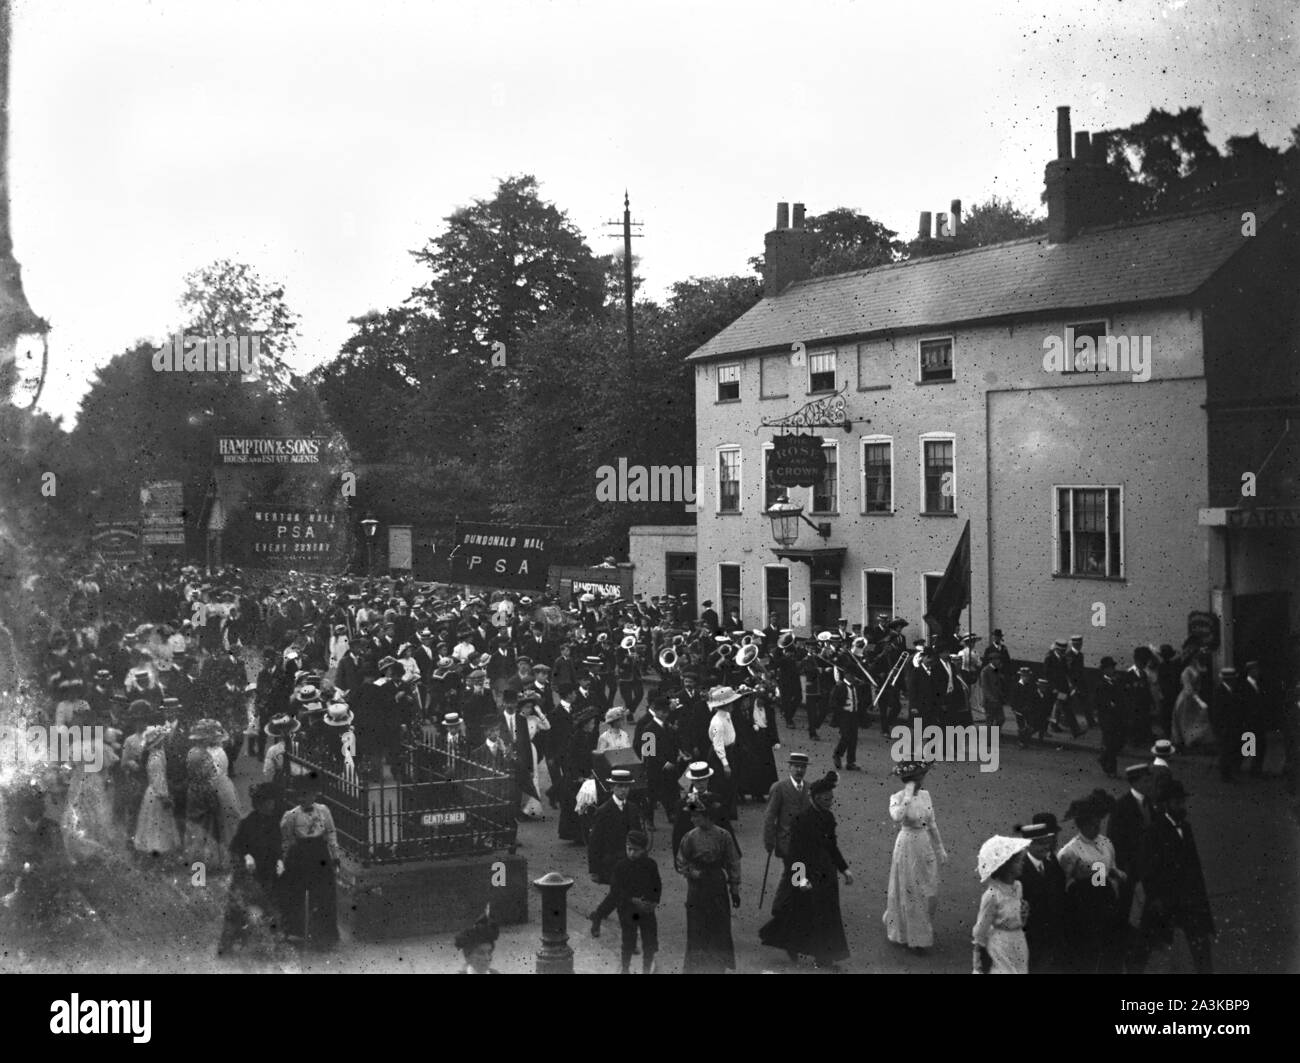 Baptists and other similar groups marching past the Rose & Crown pub on the High Street in Wimbledon c1907 Photo by Tony Henshaw Archive Stock Photo